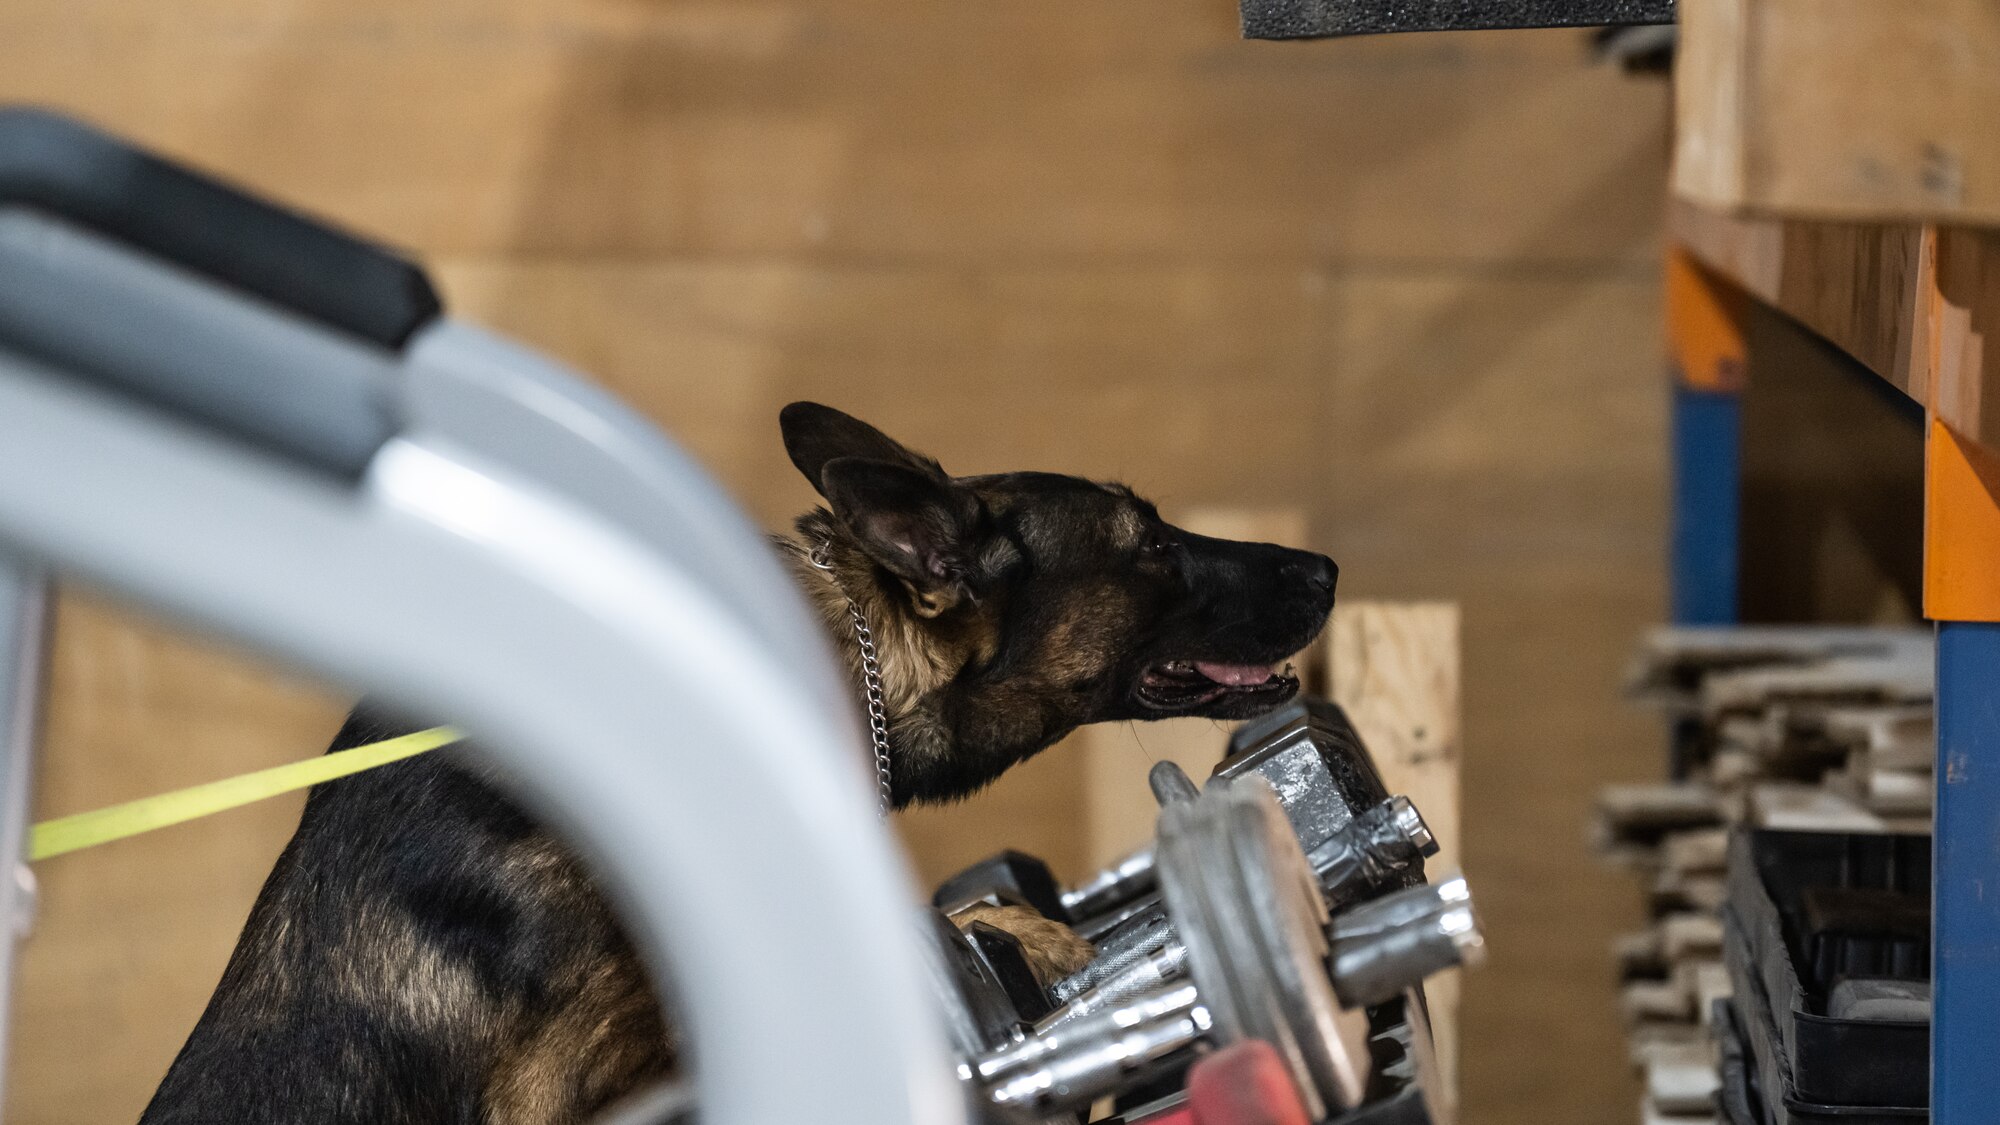 U.S. Air Force military working dog Lucky from the 386th Expeditionary Security Forces Squadron searches a warehouse for potential explosives during a training event with his handler at Ali Al Salem Air Base, Kuwait, Sept. 14, 2023. MWD handlers and their loyal K-9 partners make up a highly trained law enforcement team capable of critical drug and explosives detection skills that protect the installation. (U.S. Air Force photo by Staff Sgt. Kevin Long)